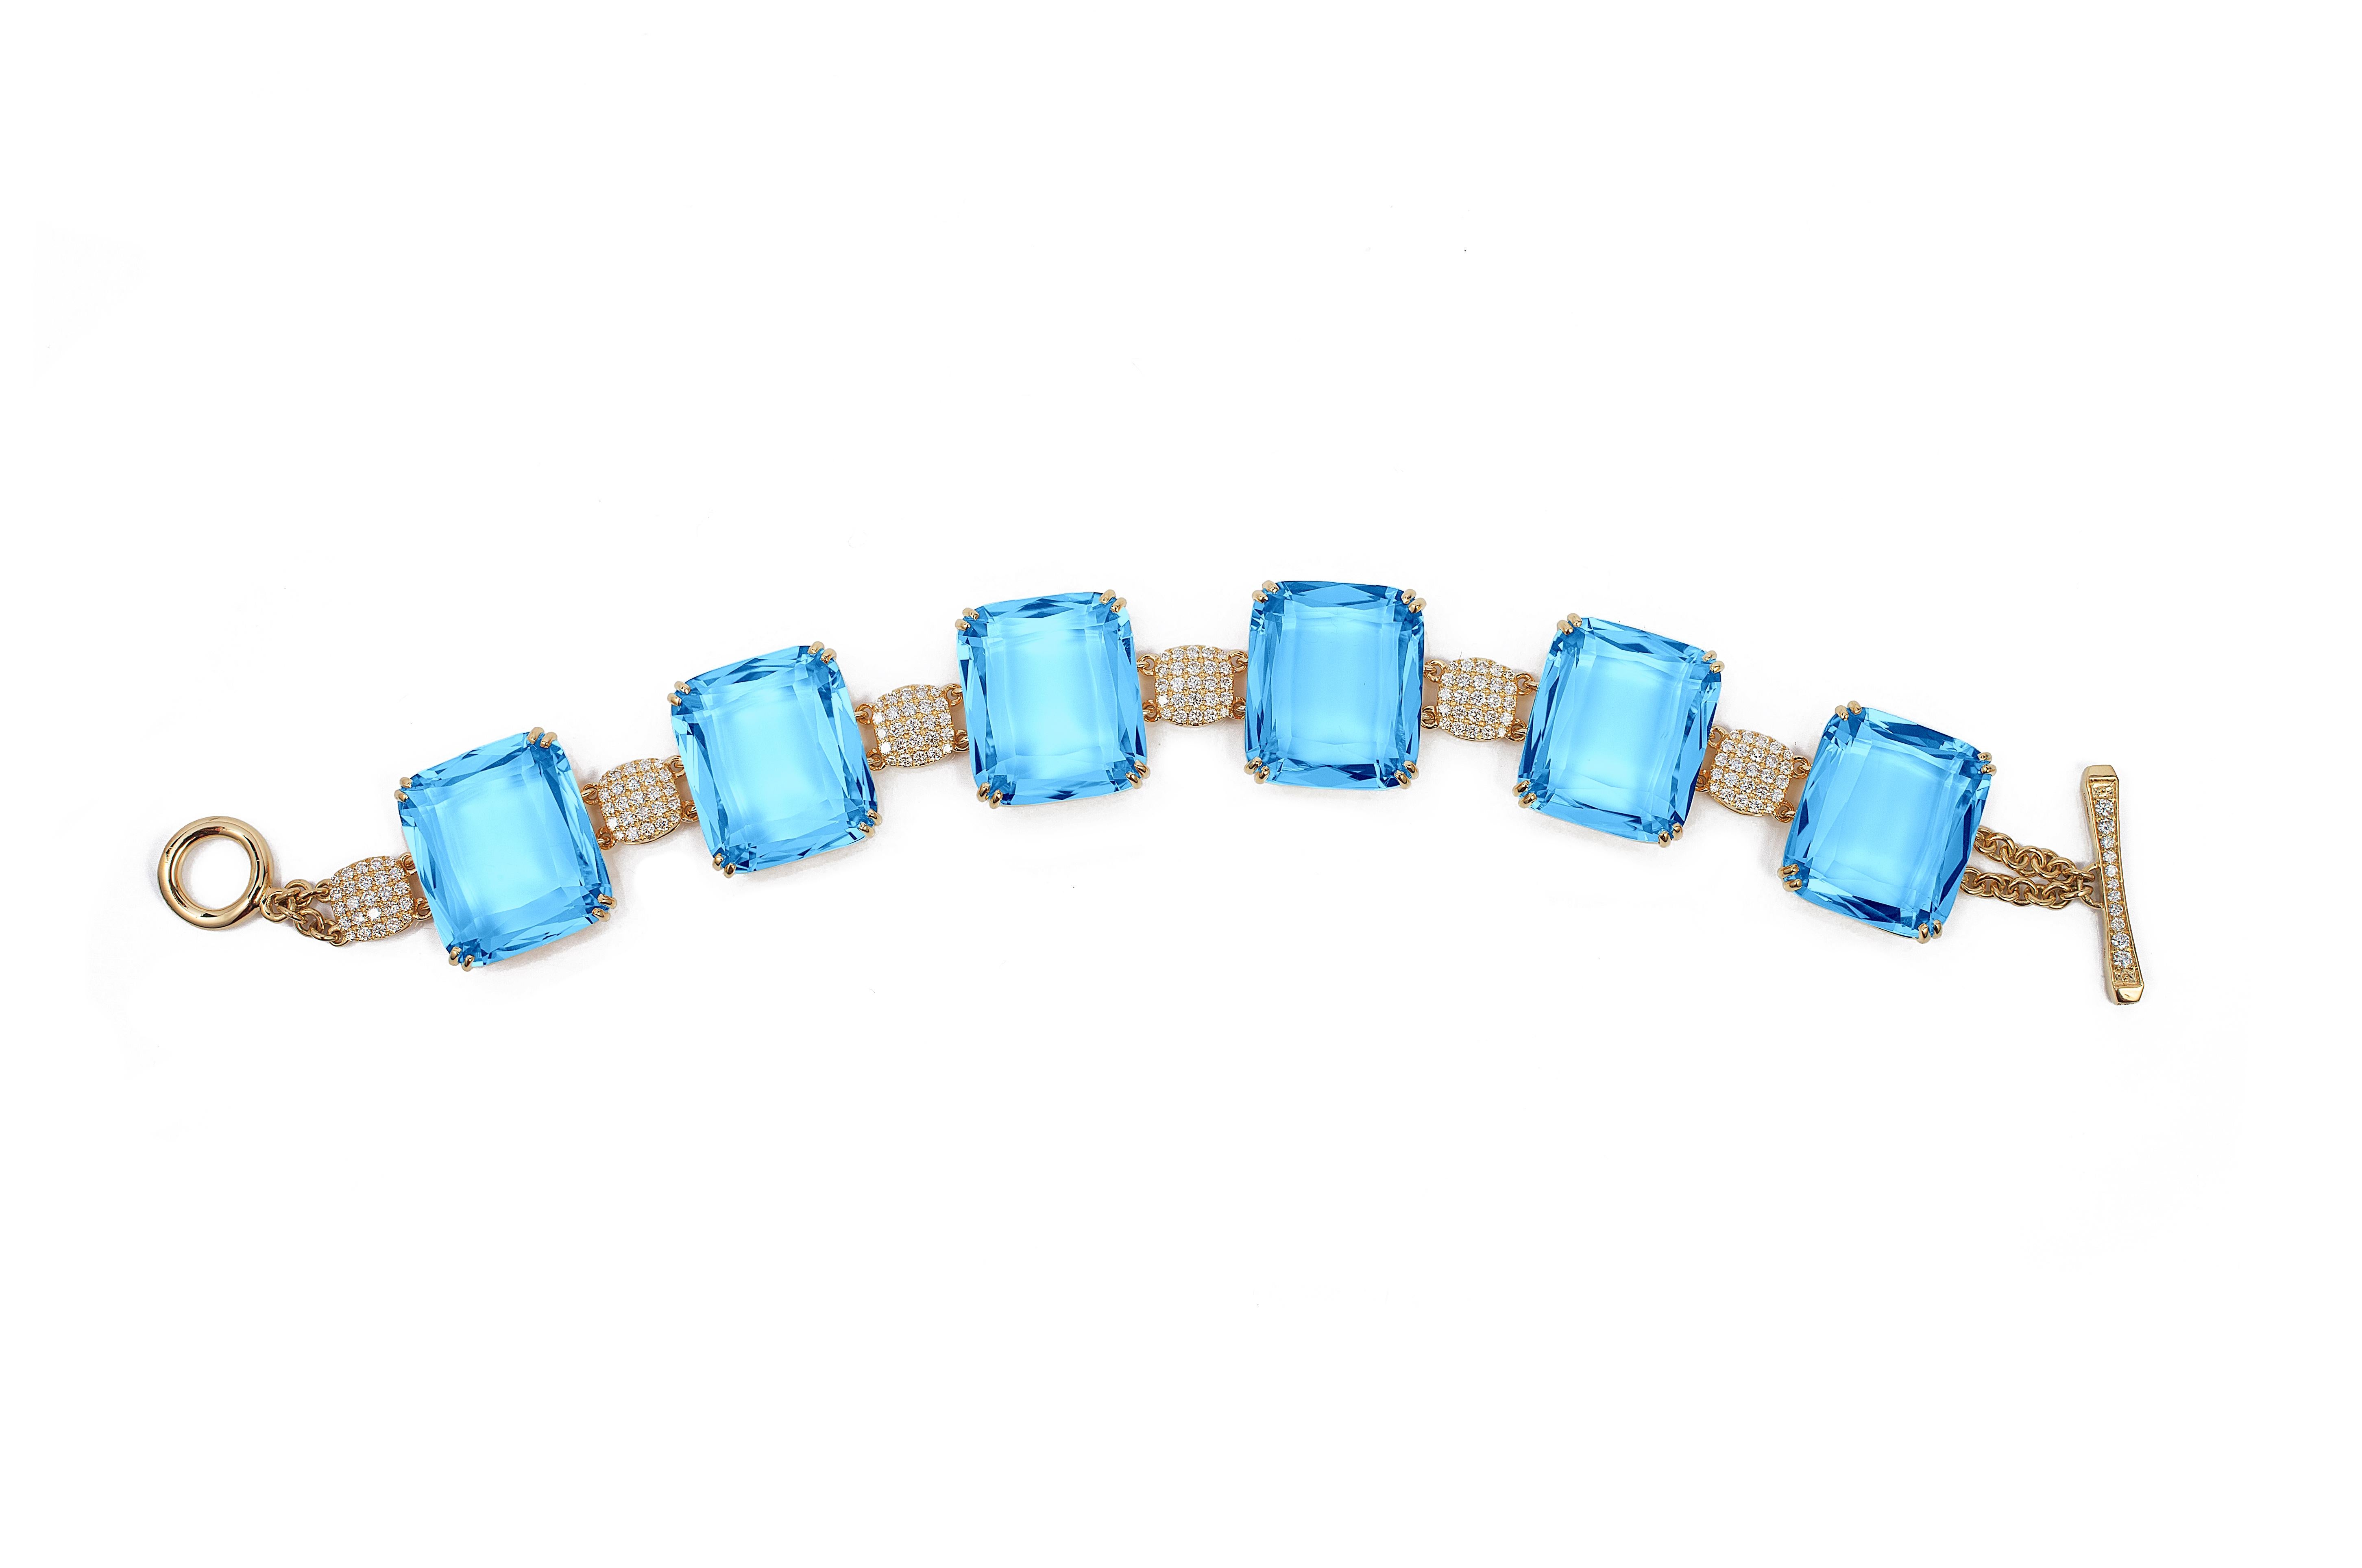 Blue Topaz Faceted Flat Cushion Bracelet with Diamonds in 18K Yellow Gold, from 'Gossip' Collection
 Bracelet Length: 6 3/4''
 Stone Size: 19 x 16 mm
 Gemstone Approx. Wt: Blue Topaz- 148.91 Carats
 Diamonds: G-H / VS, Approx. Wt: 1.69 Carats